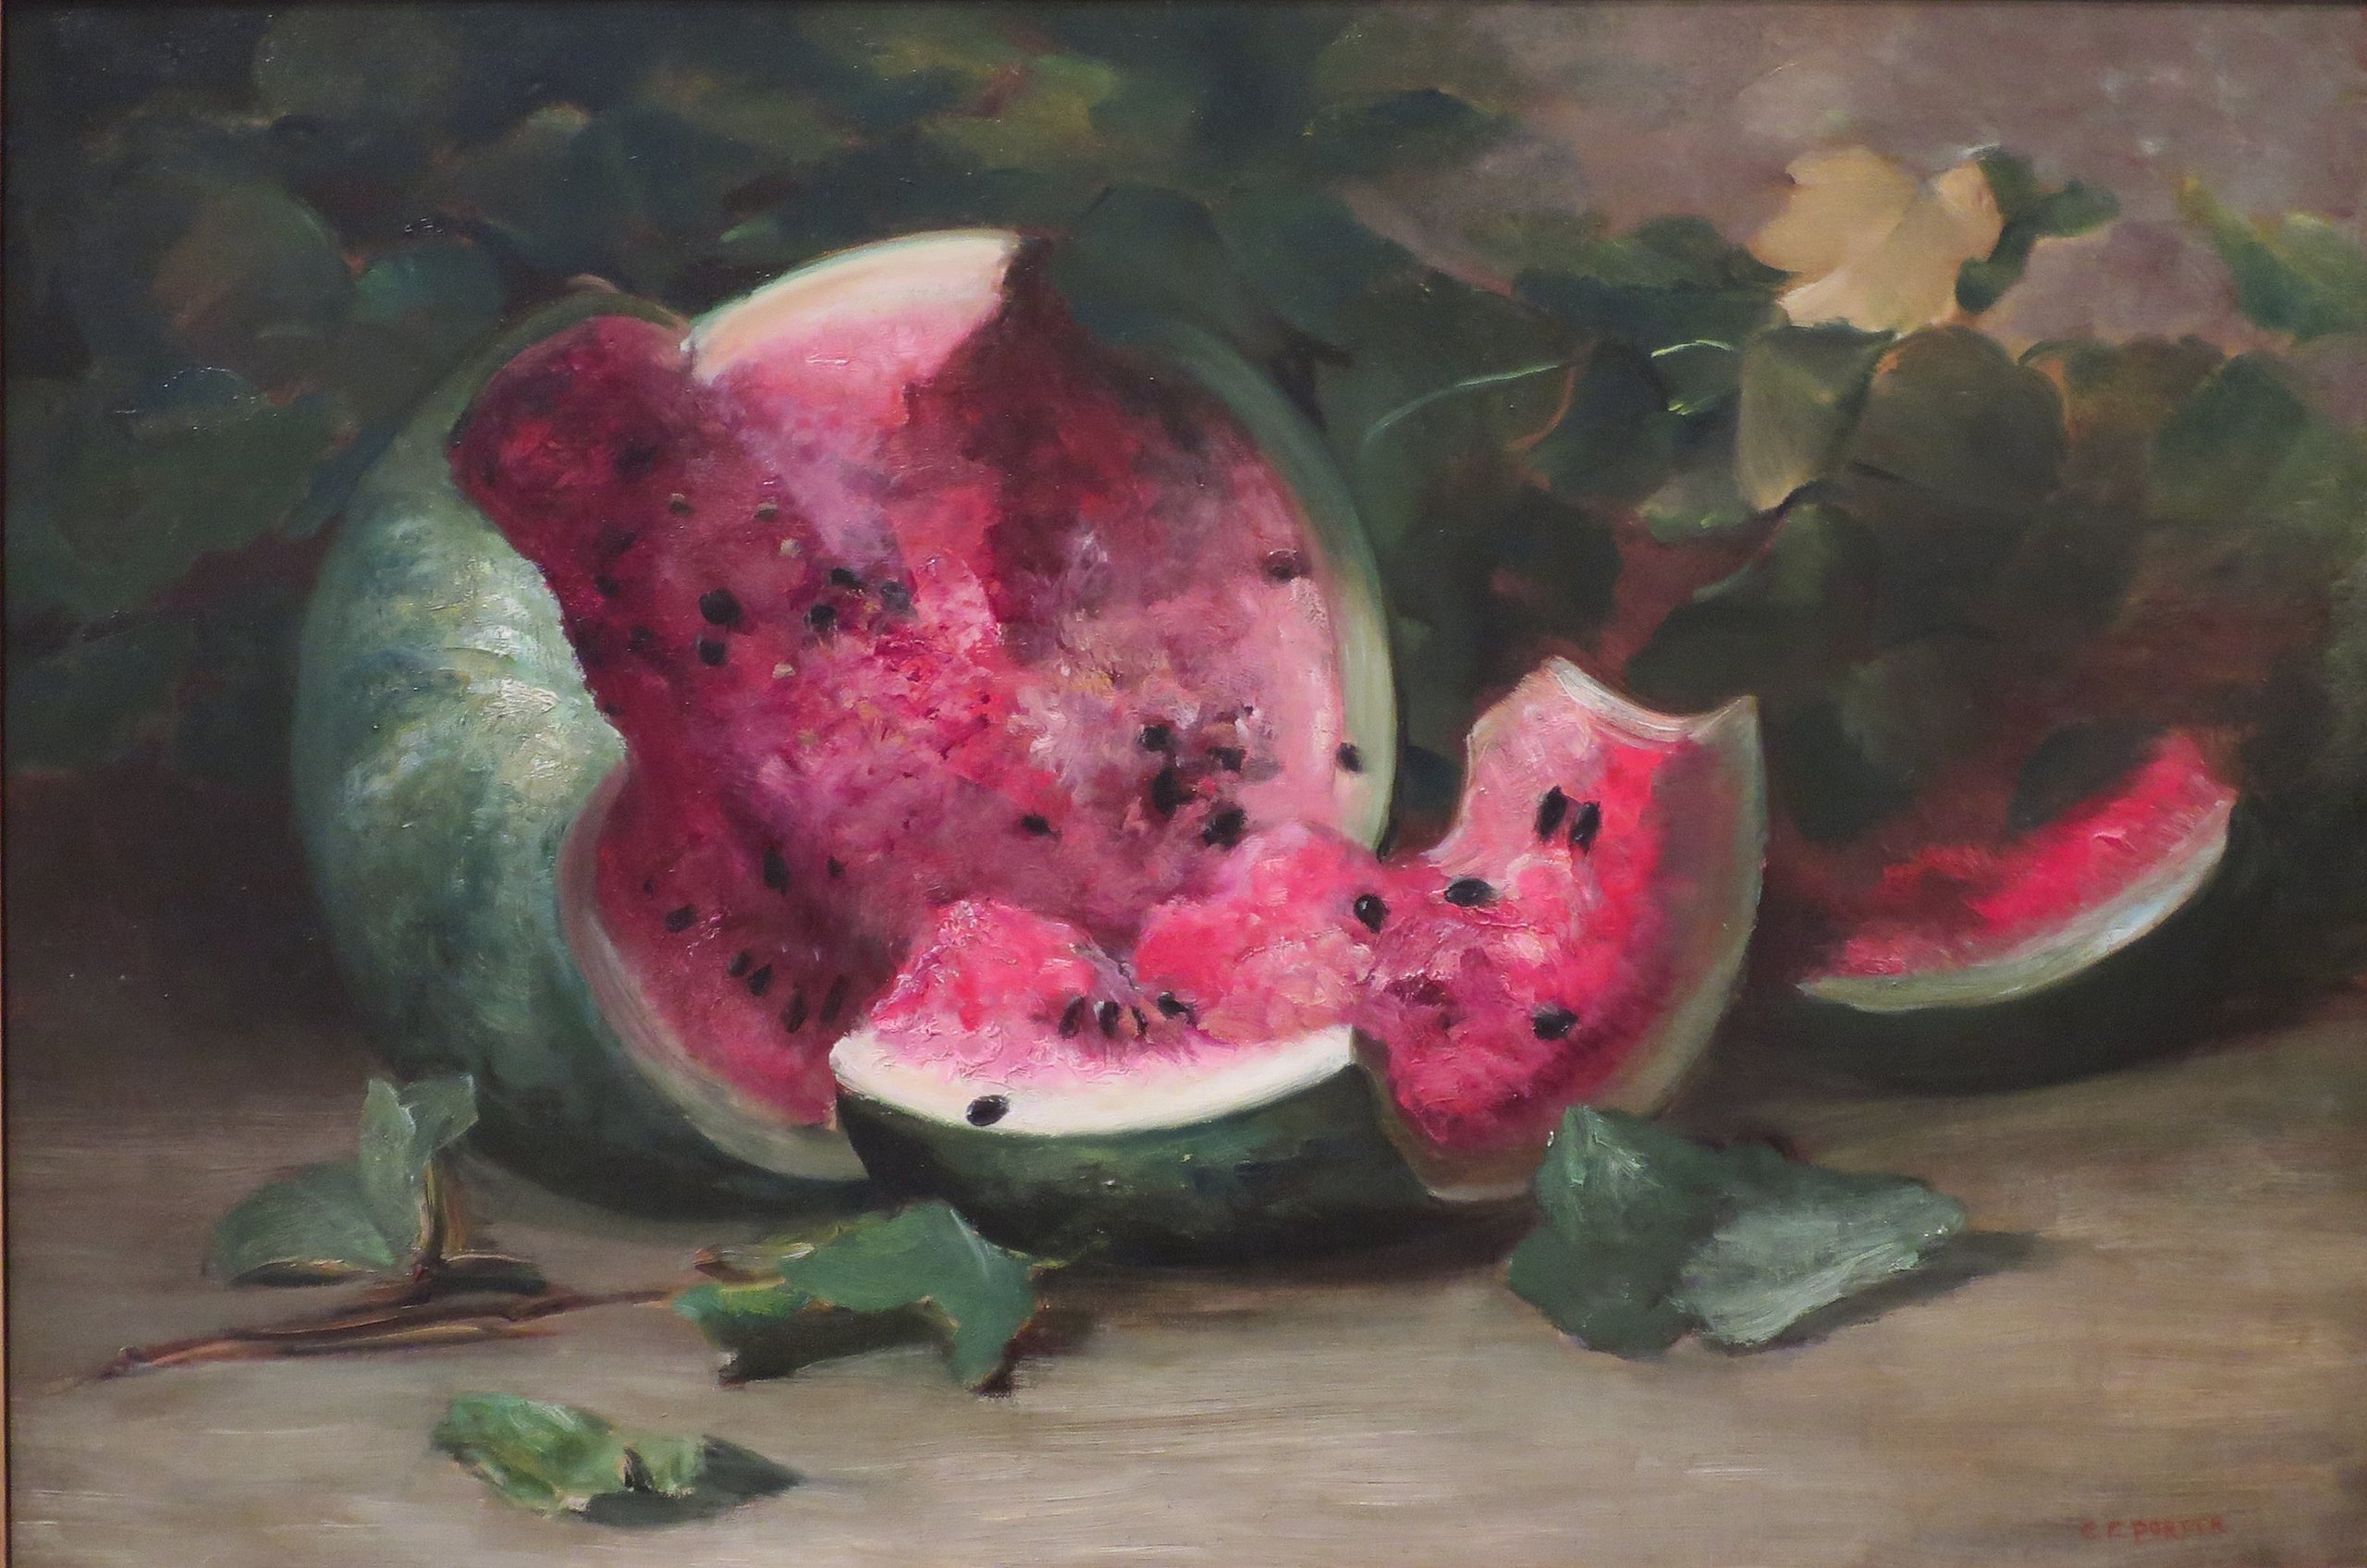 Untitled (Cracked Watermelon) by Charles Ethan Porter - c. 1890 - 48.6 × 71.6 cm Metropolitan Museum of Art